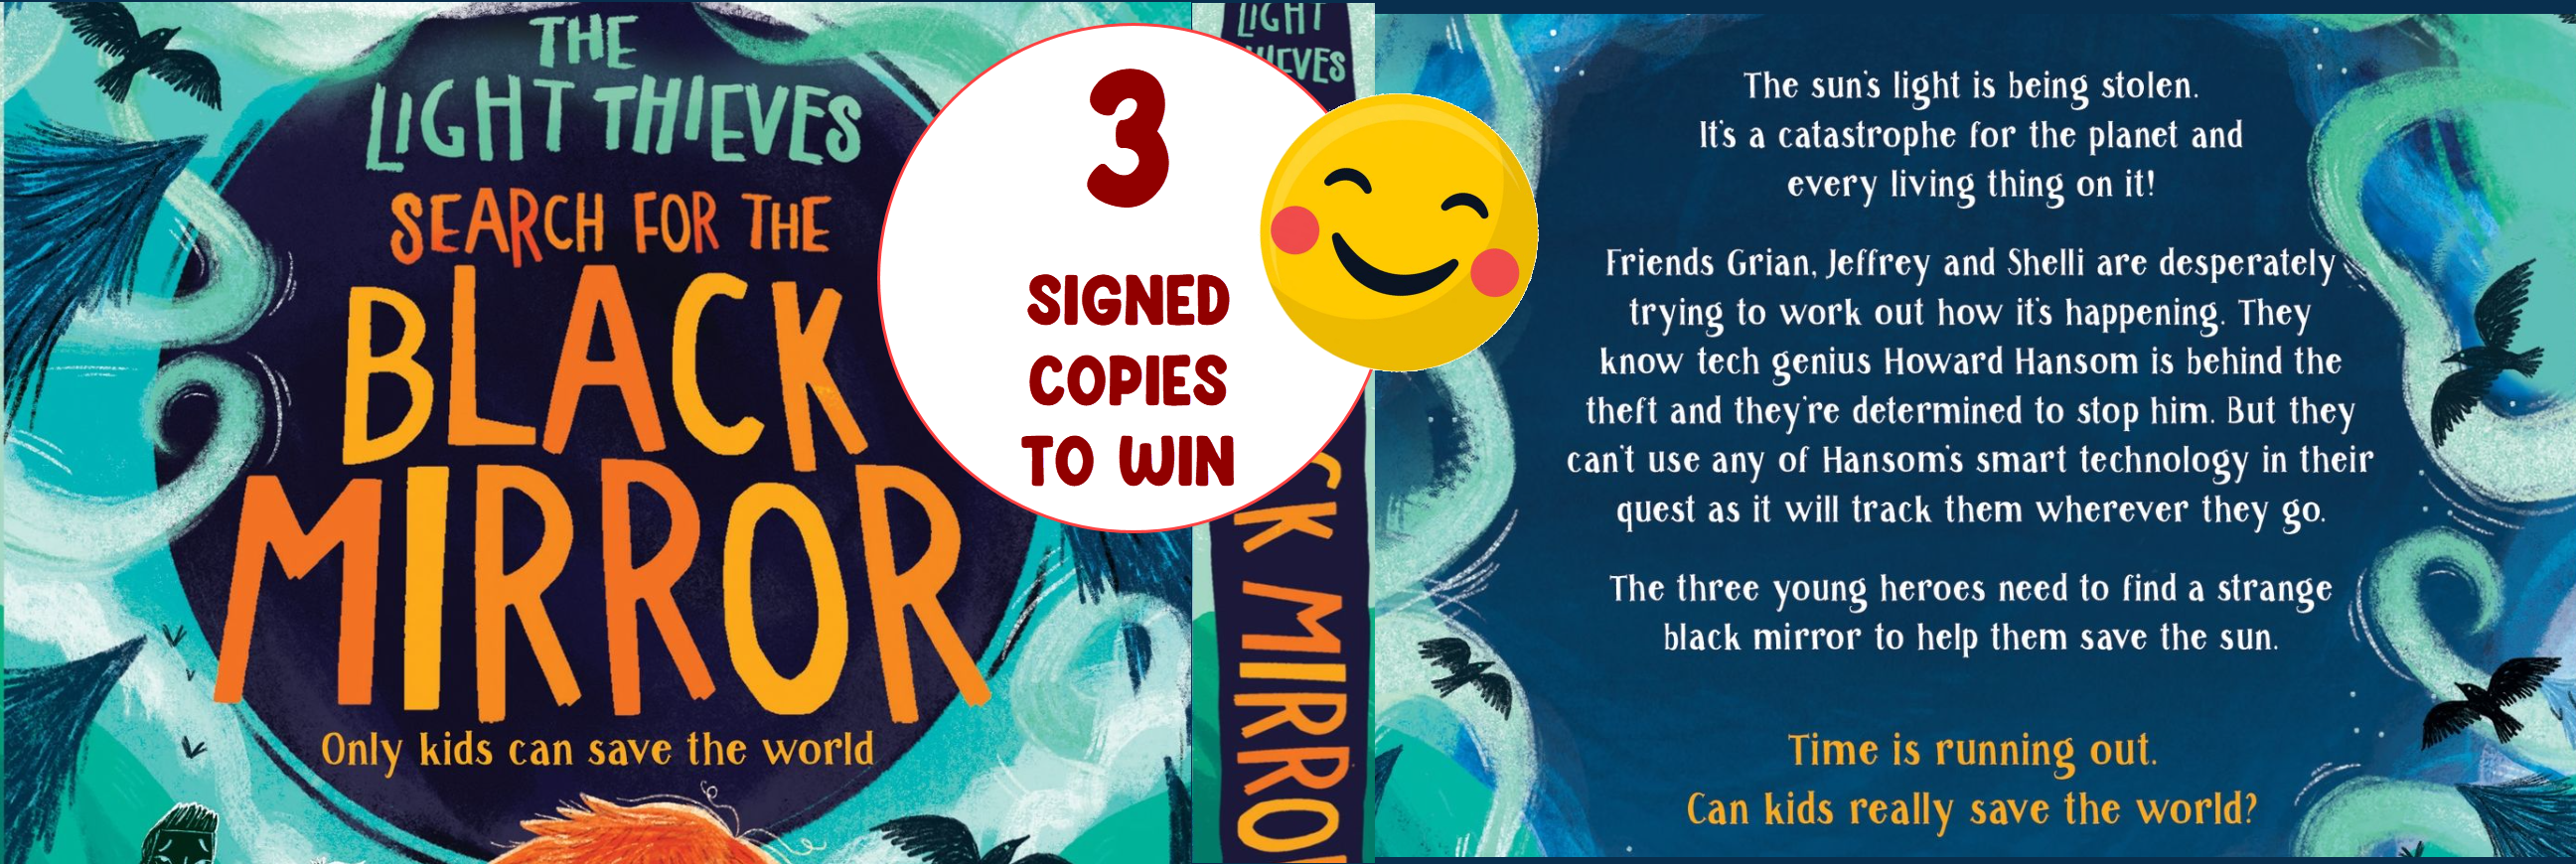 WIN 1 of 3 SIGNED copies of The Light Thieves: Search for the Black Mirror